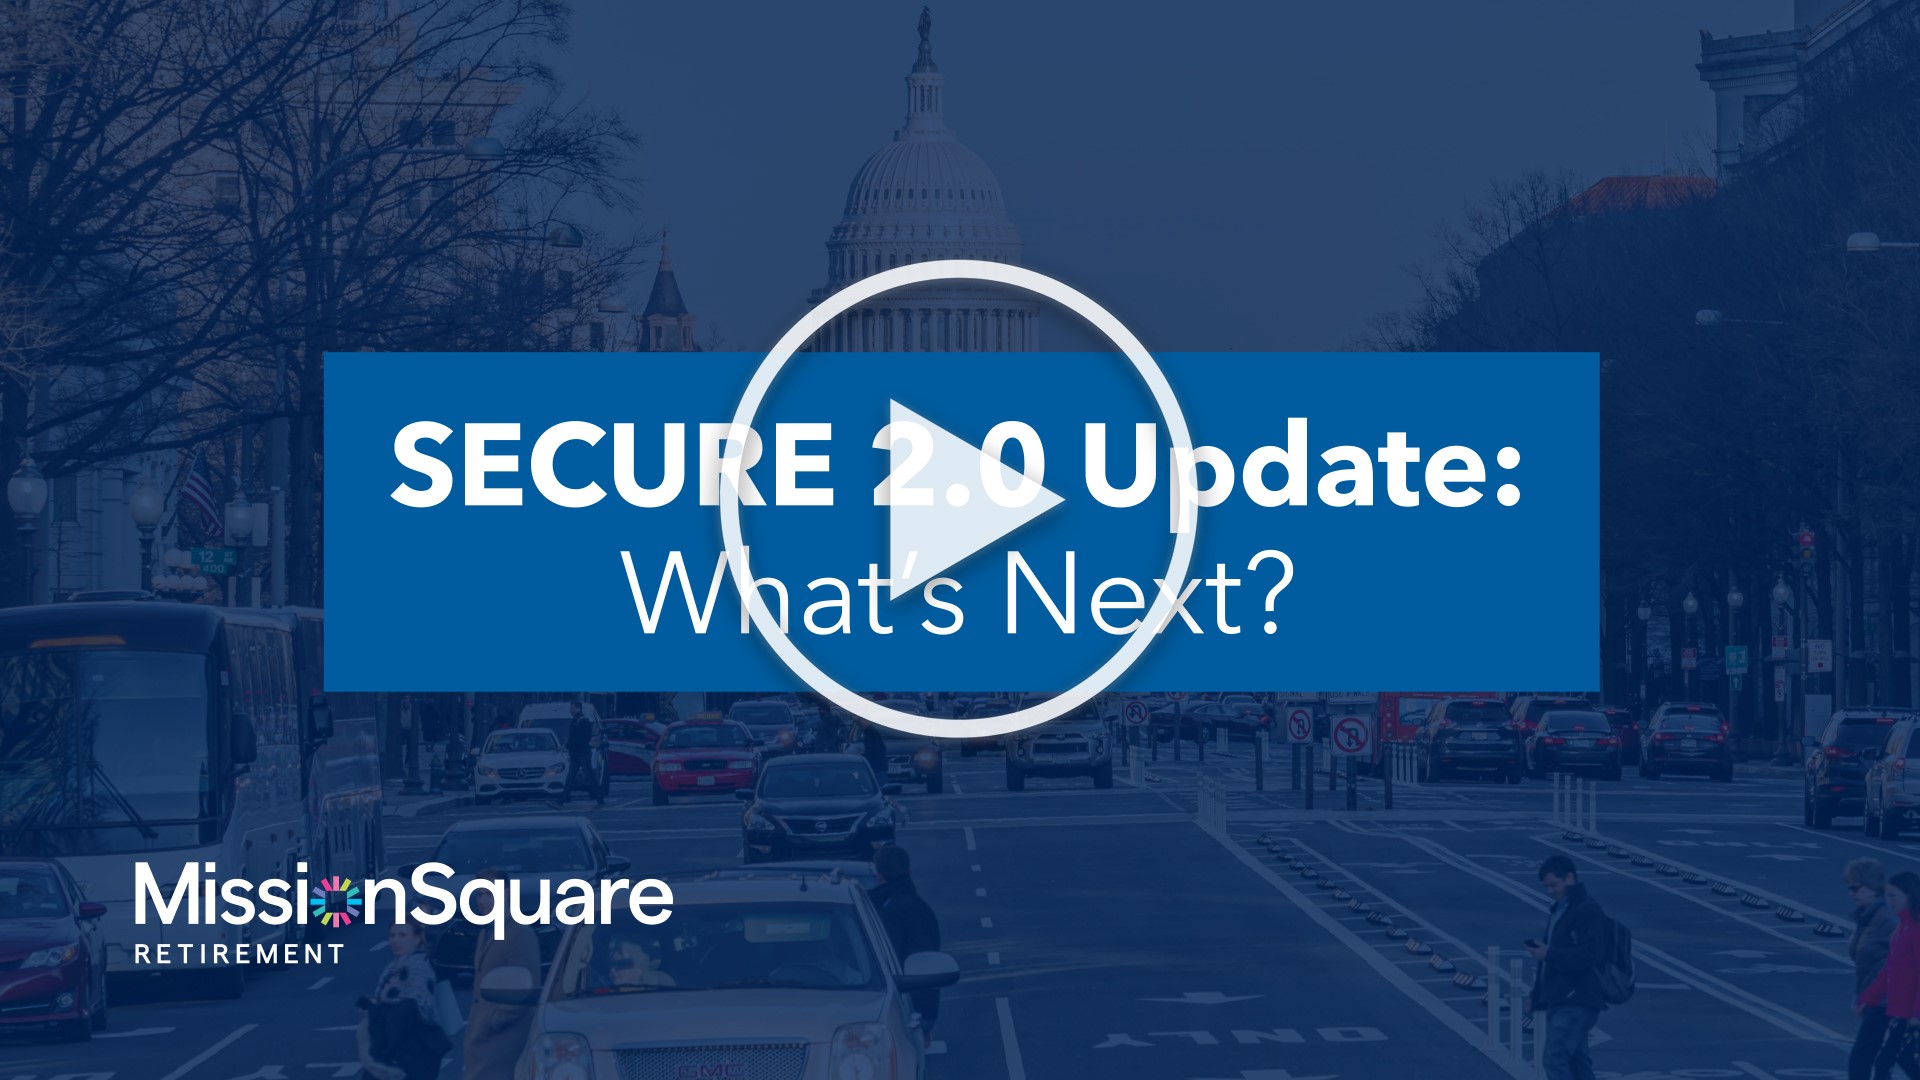 SECURE 2.0 Update: What's Next?